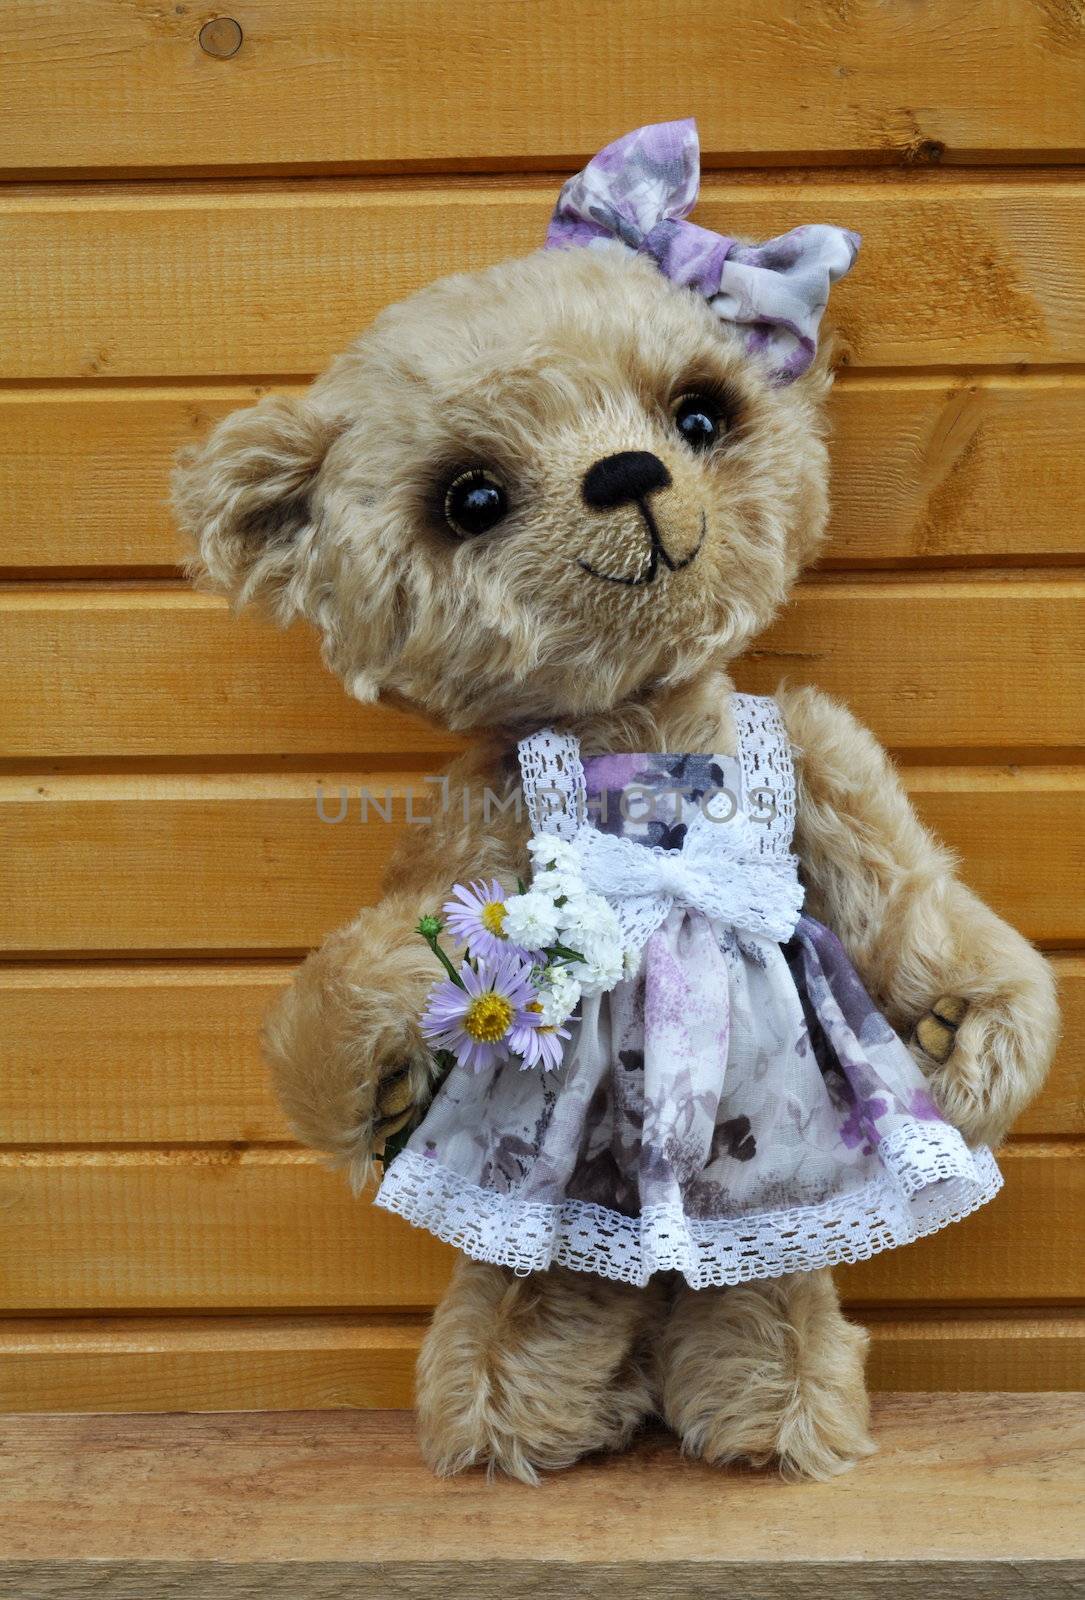 Handmade, the sewed toy: teddy bear Lucky before a wooden wall